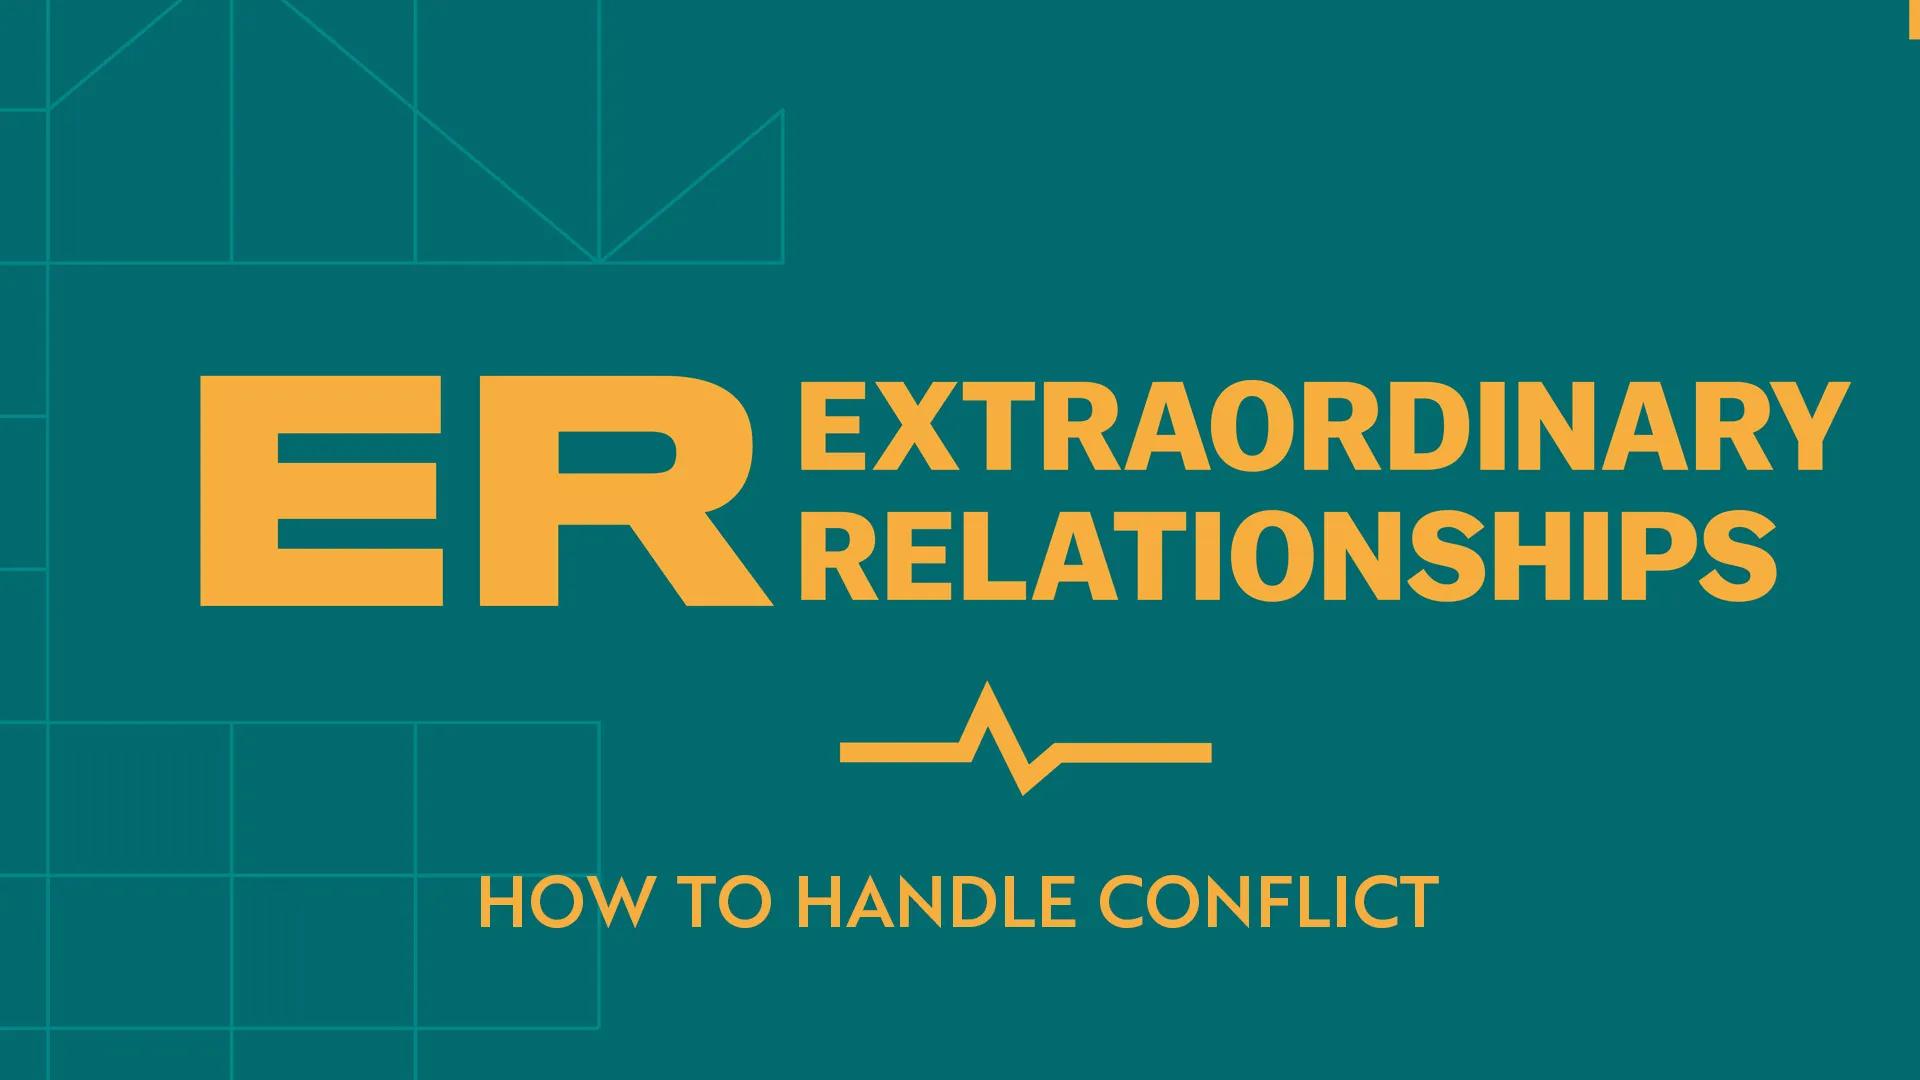 A teal background with yellow words that say "extraordinary relationship" and "how to handle conflict"